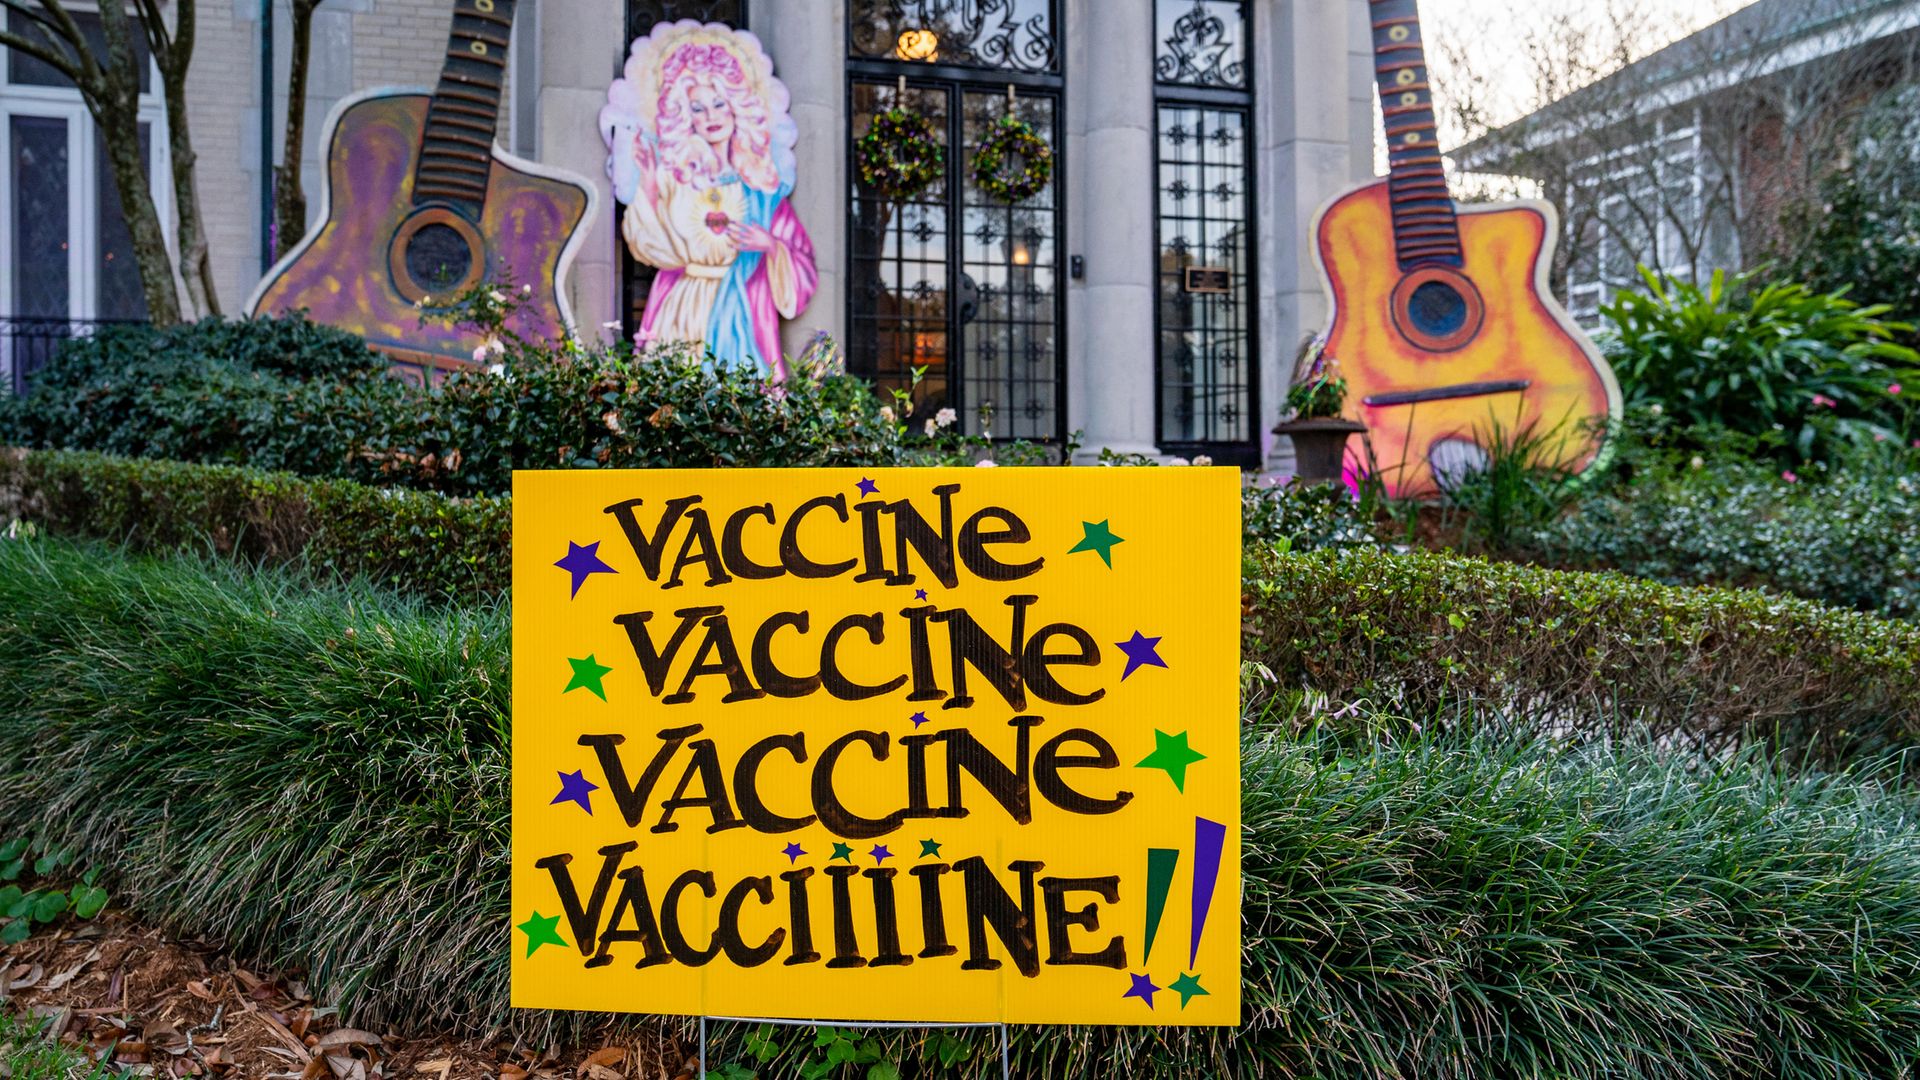 View of a home decorated in honour of Dolly Parton, with a "Vaccine, Vaccine, Vaccine, Vacciiiine!!!" sign meant to evoke the lyrics of Parton's song "Jolene" on January 28, 2021 in New Orleans, Louisiana. Due to the COVID-19 pandemic cancelling traditional Mardi Gras activities, New Orleanians are decorating their homes and businesses to resemble Mardi Gras floats. - Credit: Getty Images